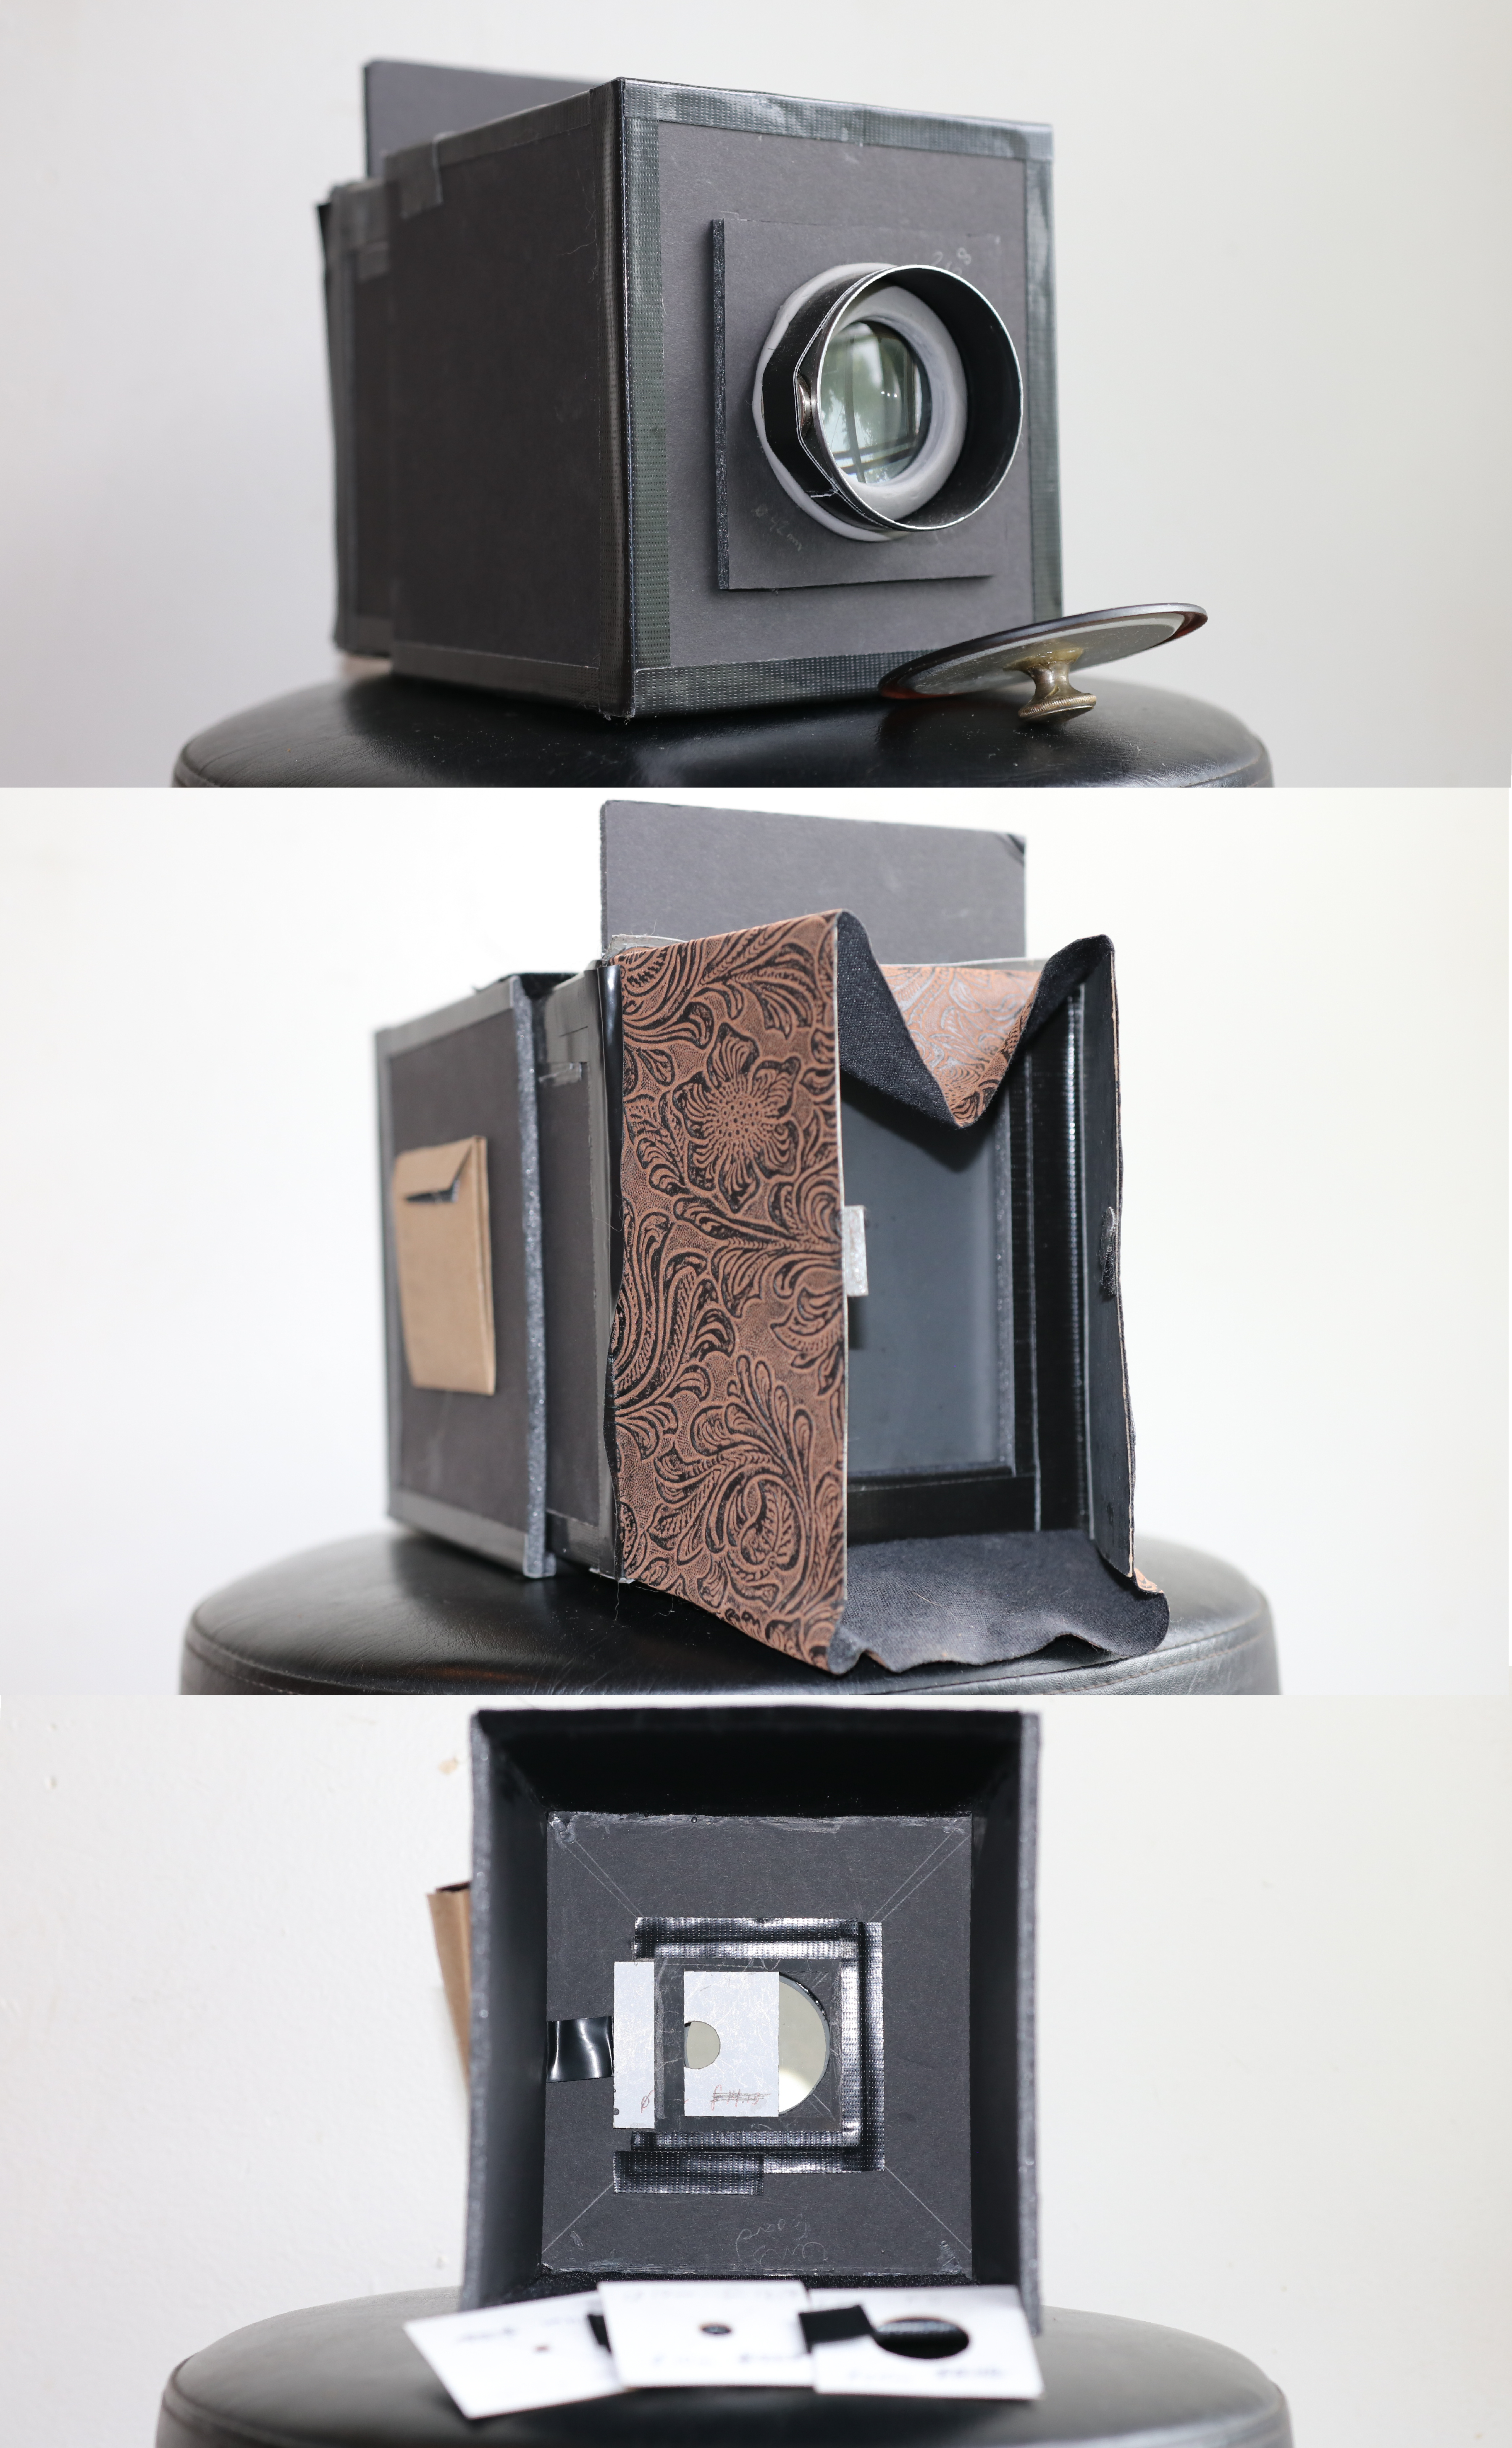 Foam core 4x5 camera, accepts 4x5 film holders. Features a ground glass and a magnetic lens cap/shutter. Like my first attempt in cardboard, a dollar store magnifying glass was used. The aperature is changeable by sliding cards with varying aperature diameters into a slot behind the lens, and the focus is controlled by sliding the inner and outer boxes closer together/farther apart.